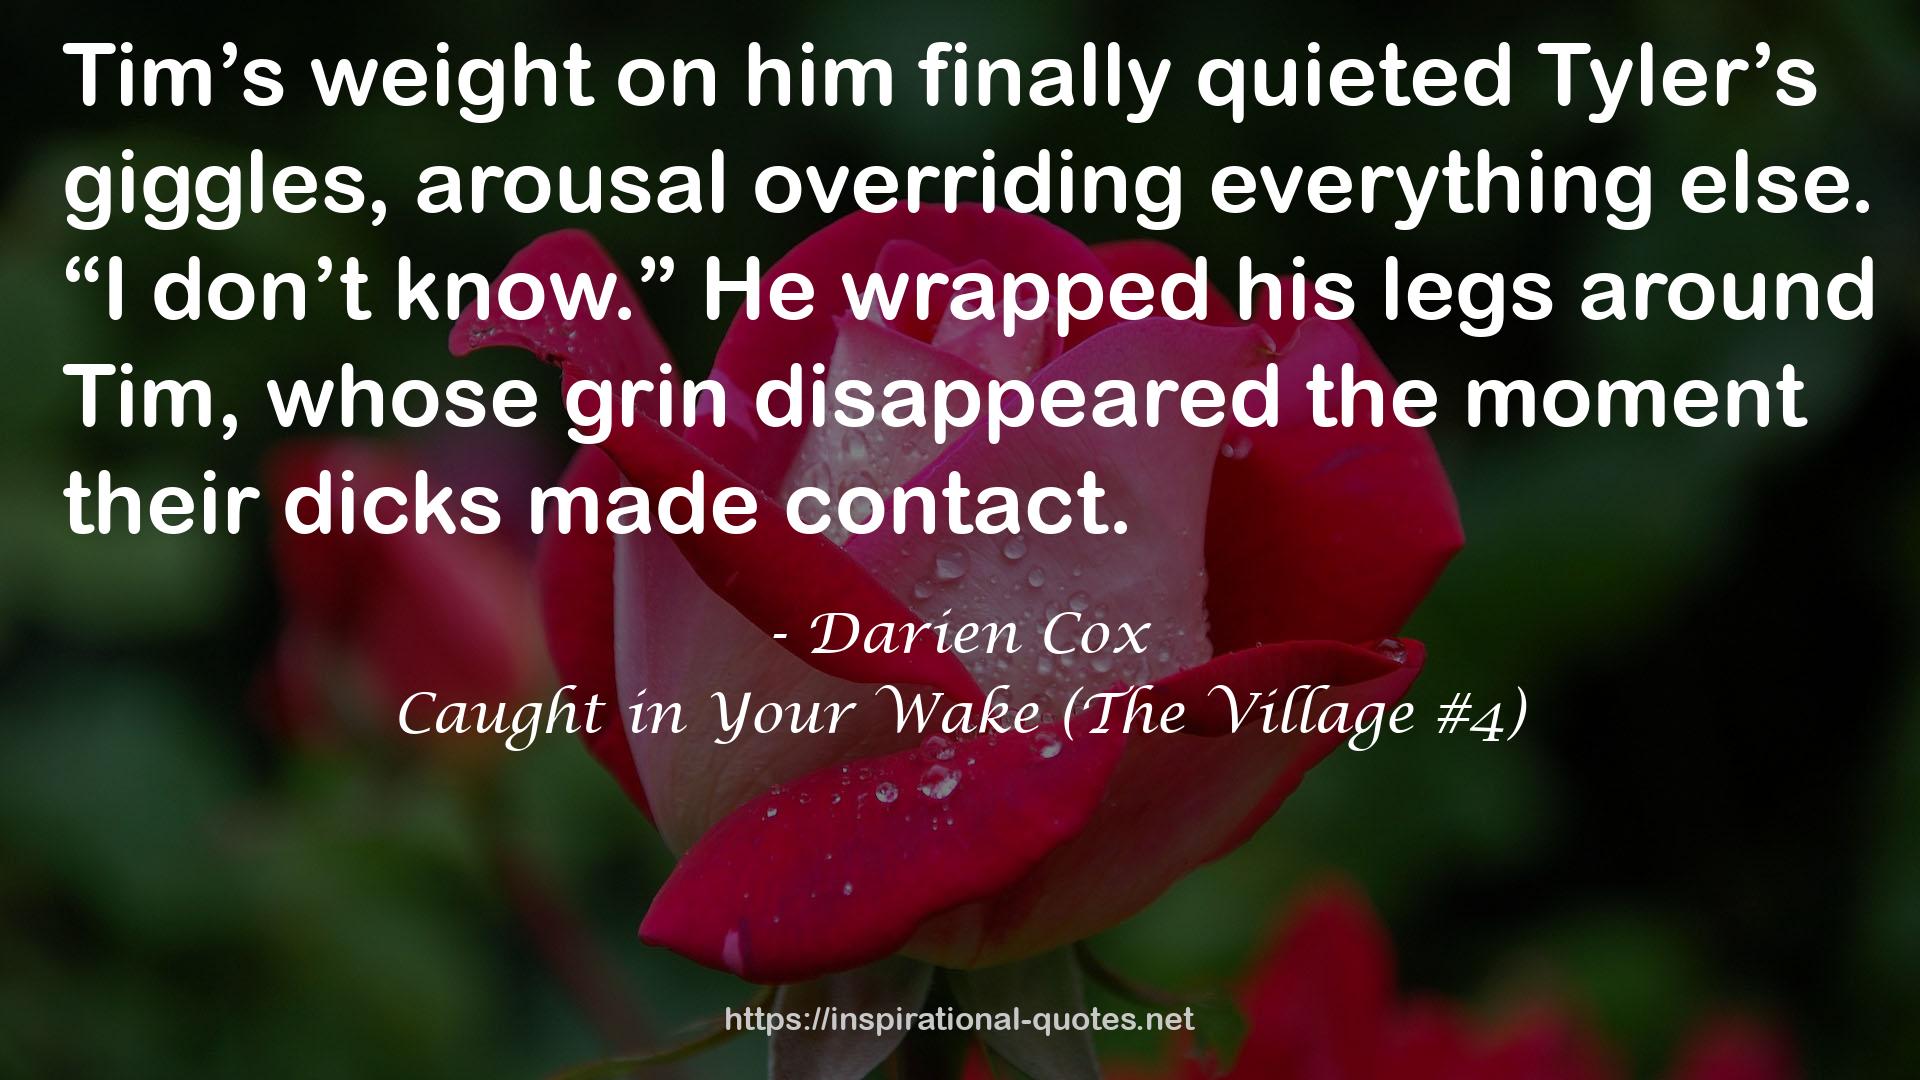 Caught in Your Wake (The Village #4) QUOTES